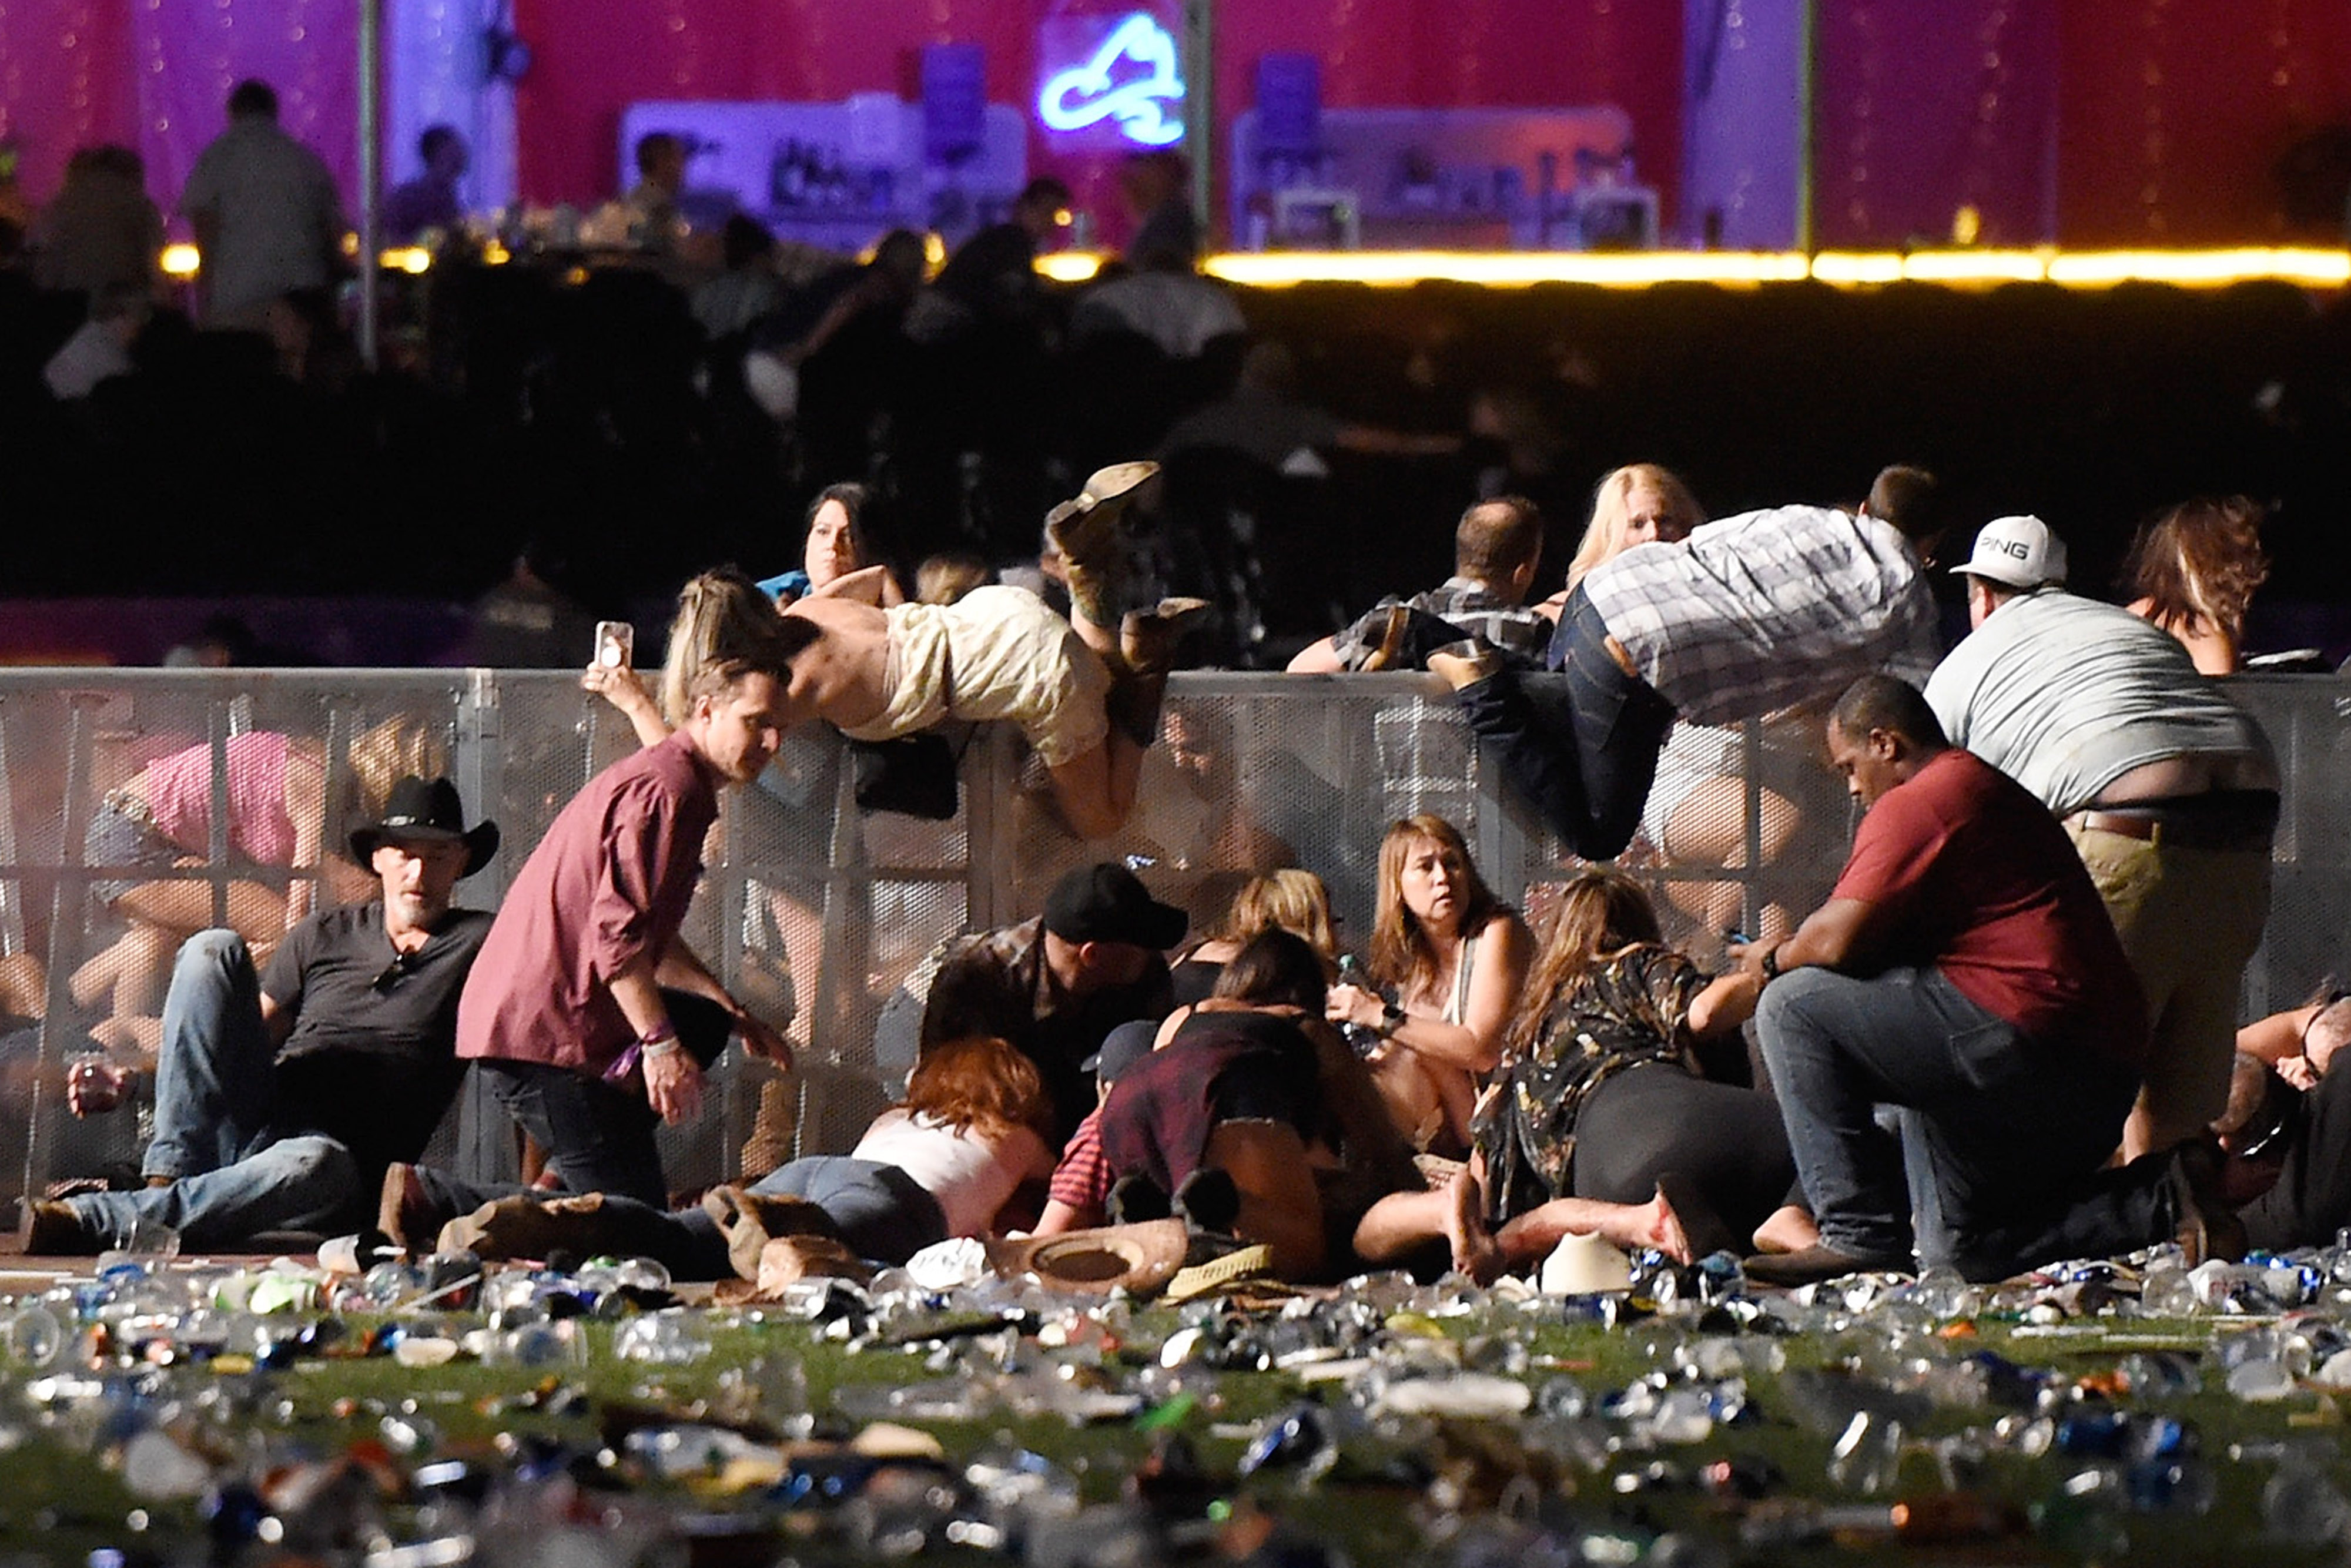 How You Can Help the Victims of the Mass Shooting in Las Vegas